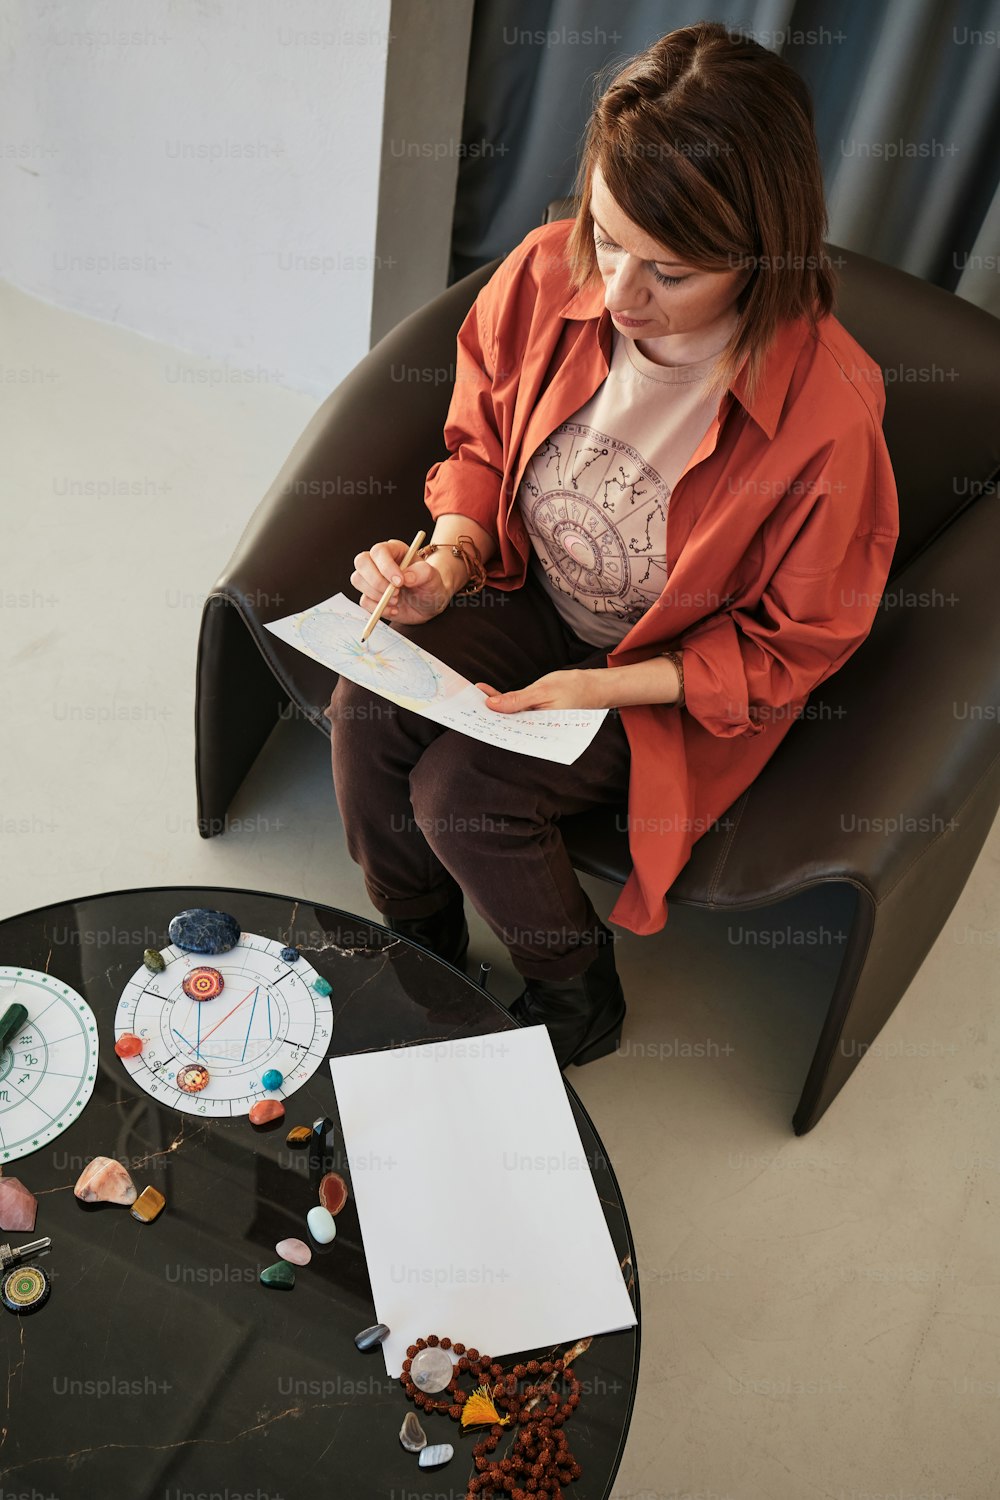 a woman sitting in a chair writing on a piece of paper